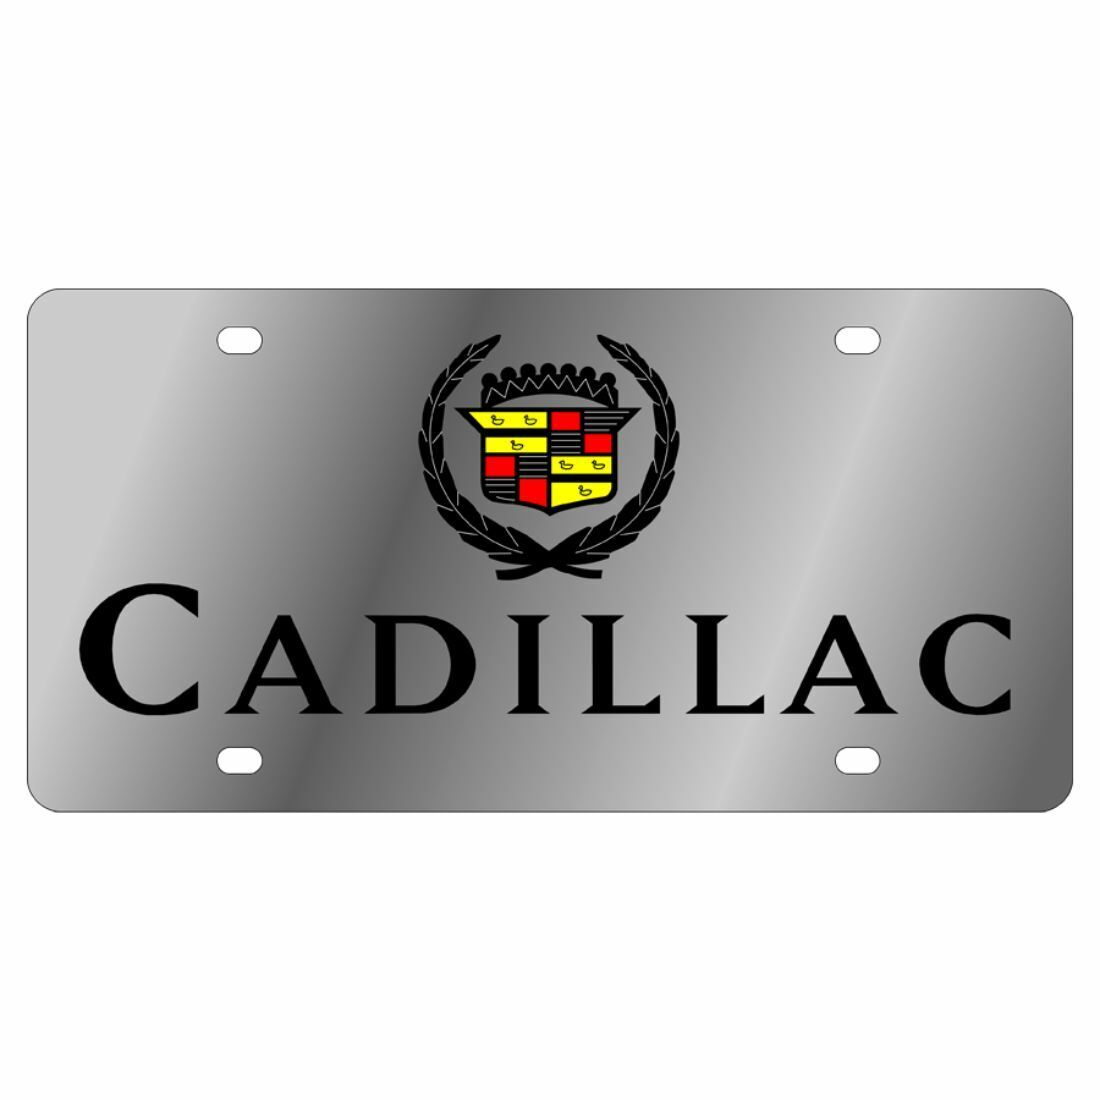 Stainless Steel Cadillac Logo Block Pre 2001 License Plate Frame 3D Novelty Tag